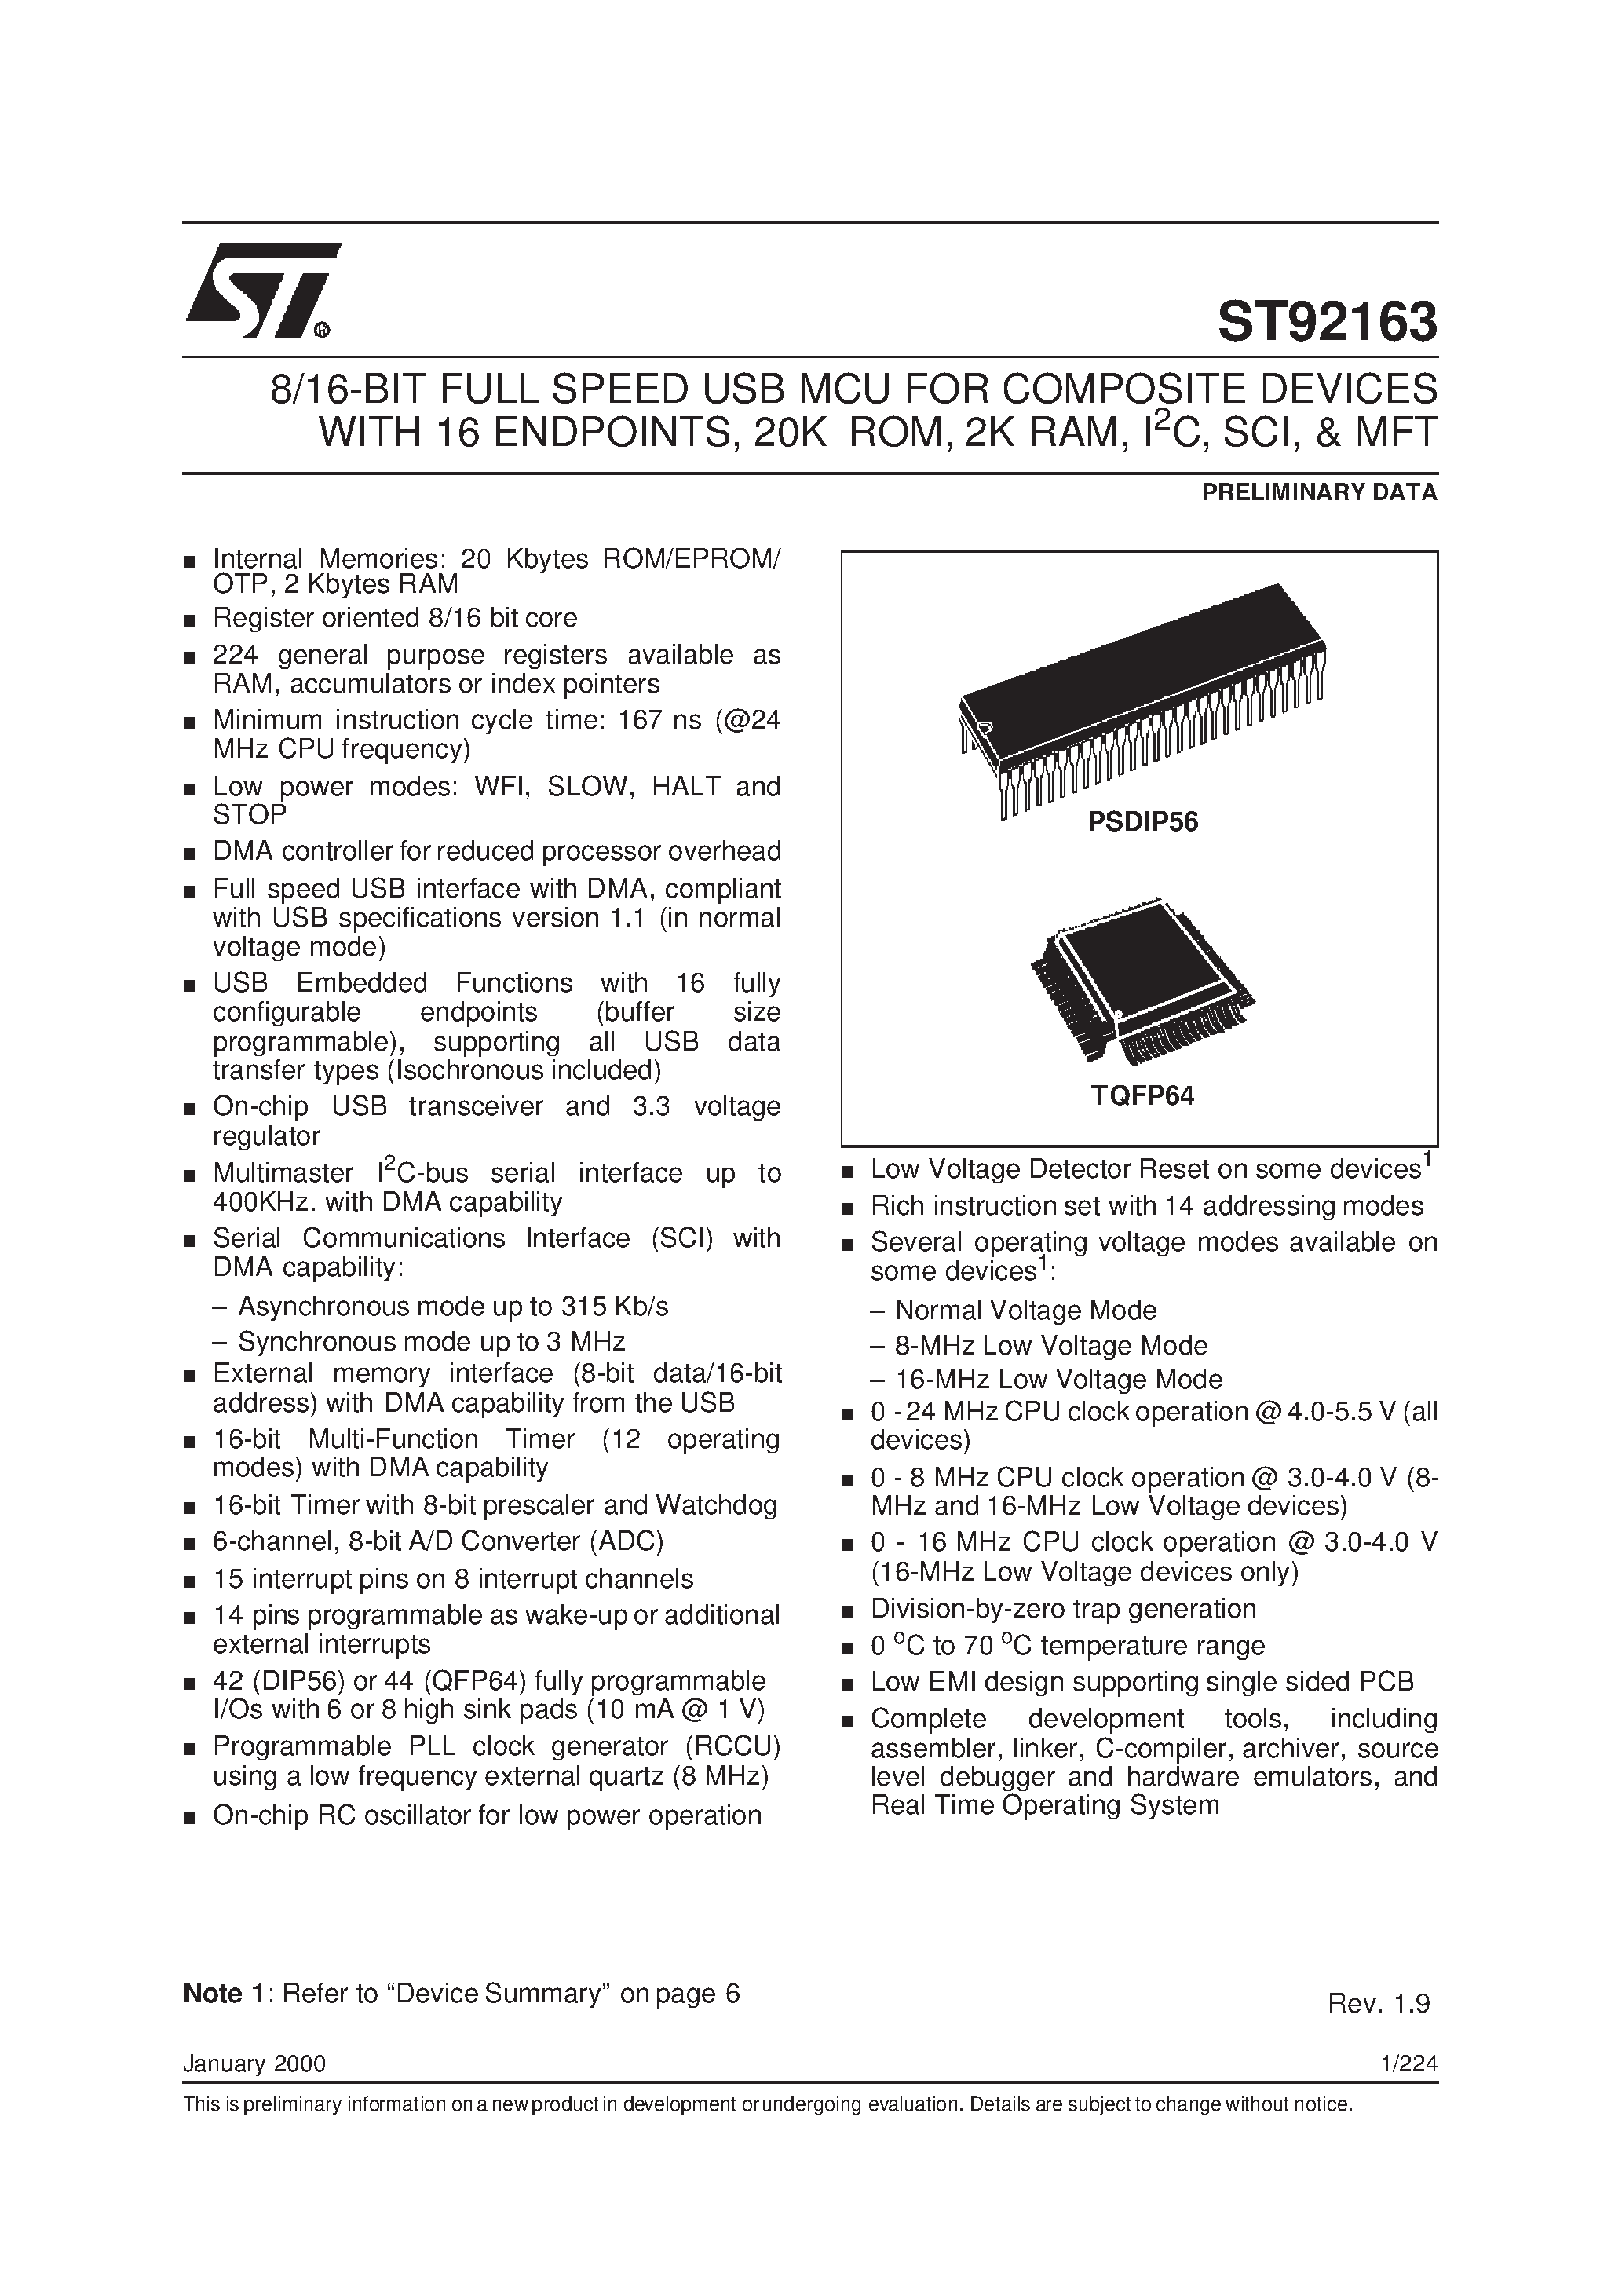 Даташит ST92163 - 8/16-BIT FULL SPEED USB MCU FOR COMPOSITE DEVICES страница 1